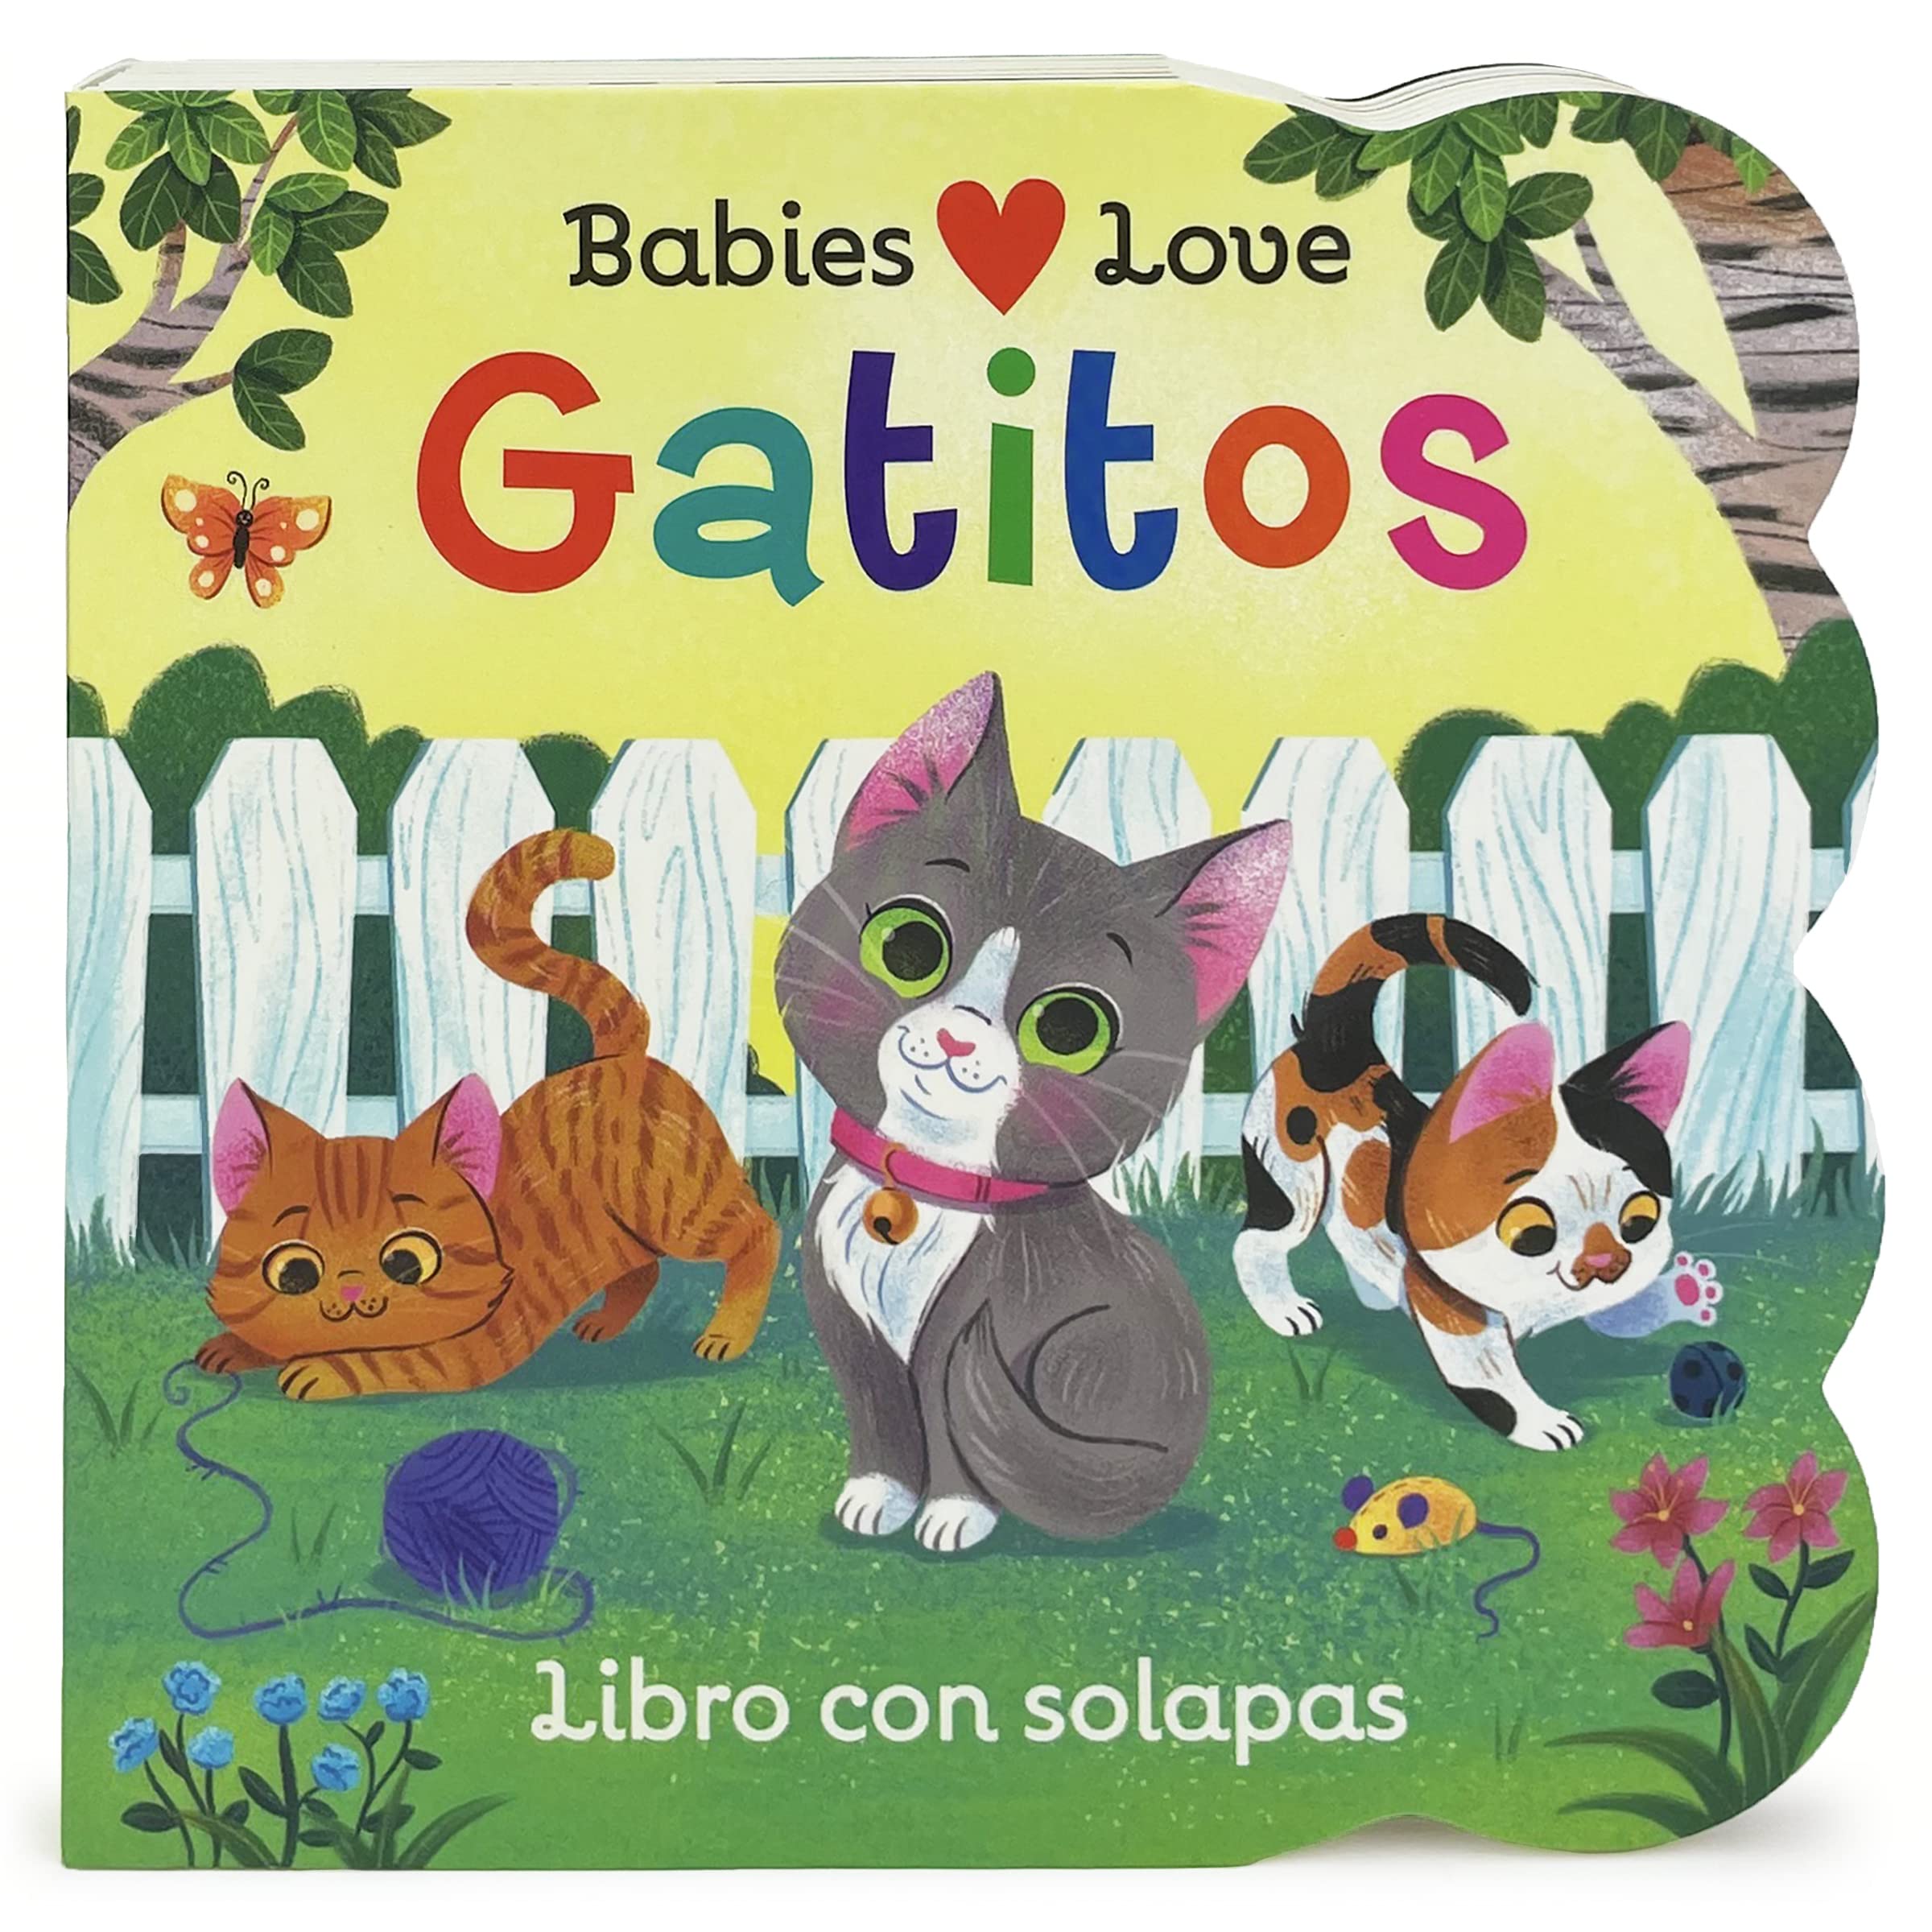 Babies Love Gatitos / Kittens Spanish Language: A Lift-a-Flap Board Book for Babies and Toddlers (en español) (Spanish Edition)